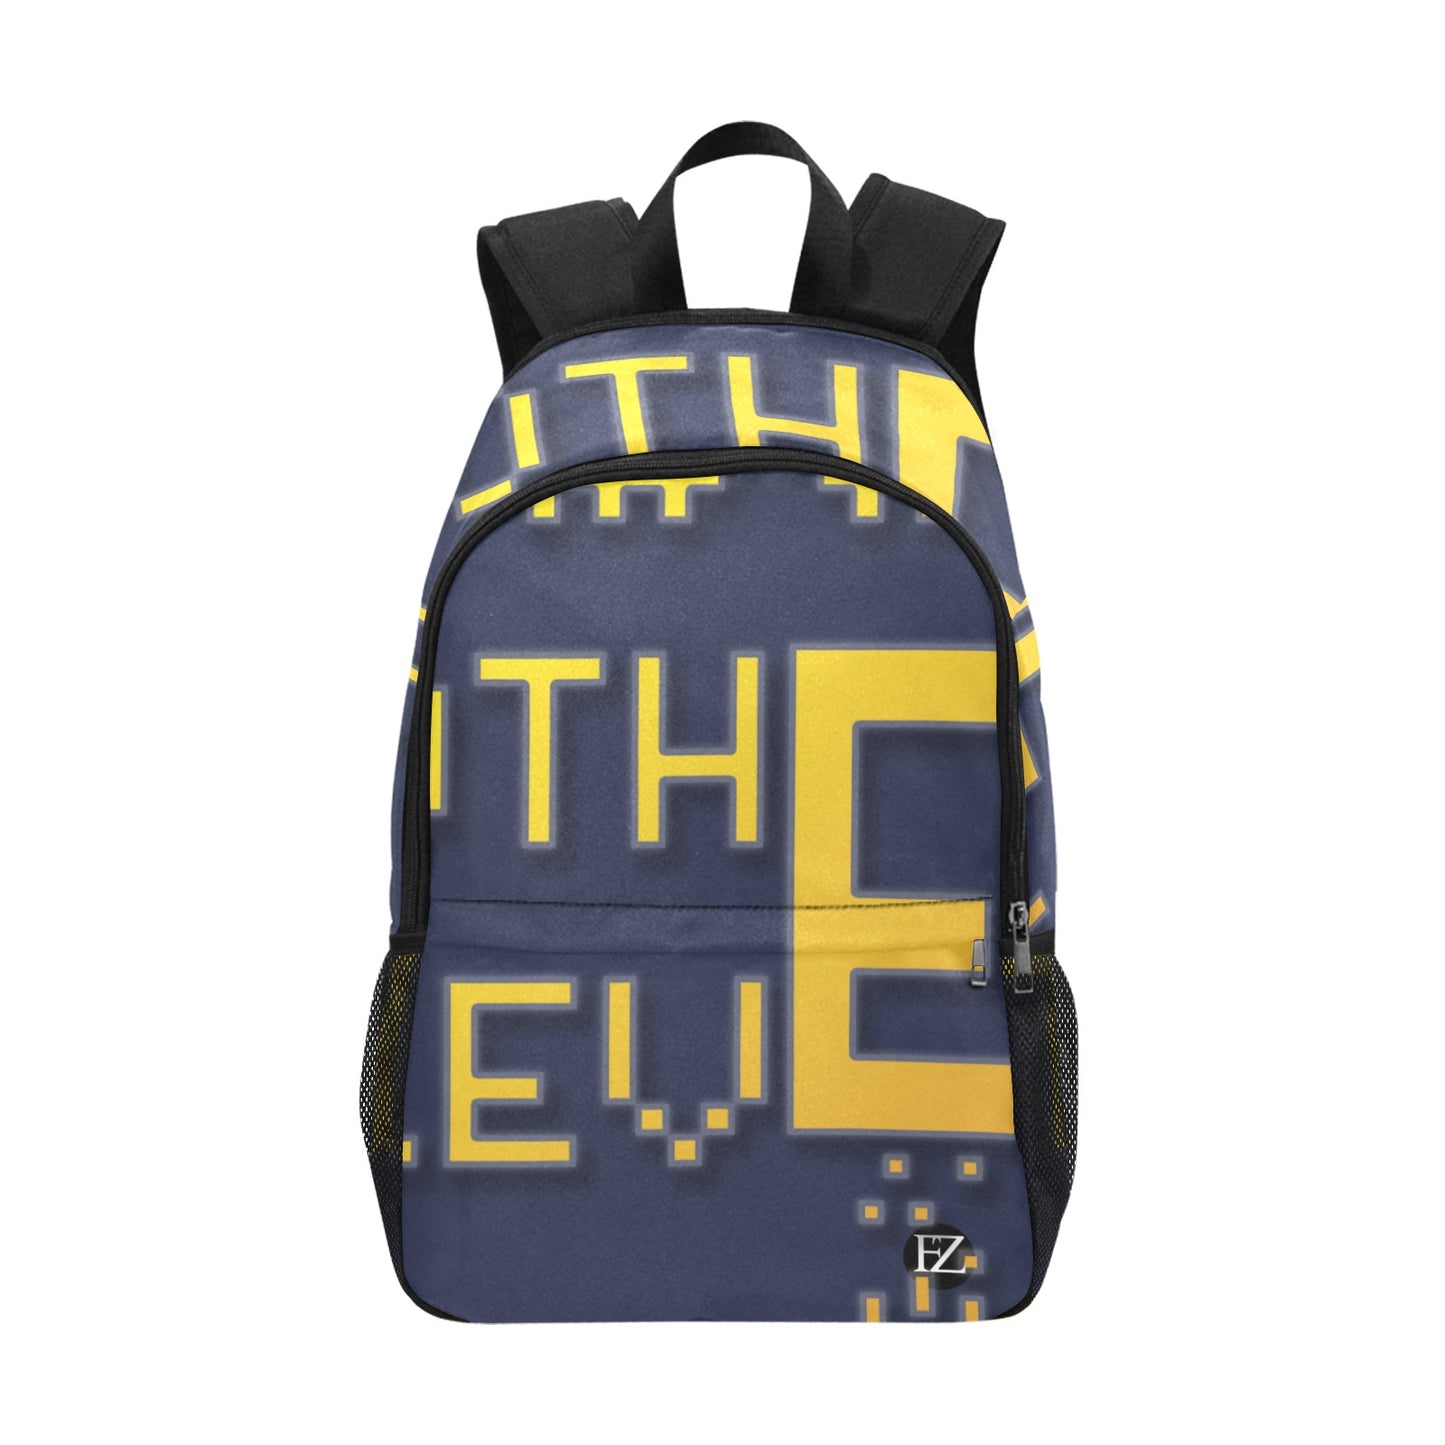 fz yellow levels backpack one size / fz levels backpack - dark blue all-over print unisex casual backpack with side mesh pockets (model 1659)